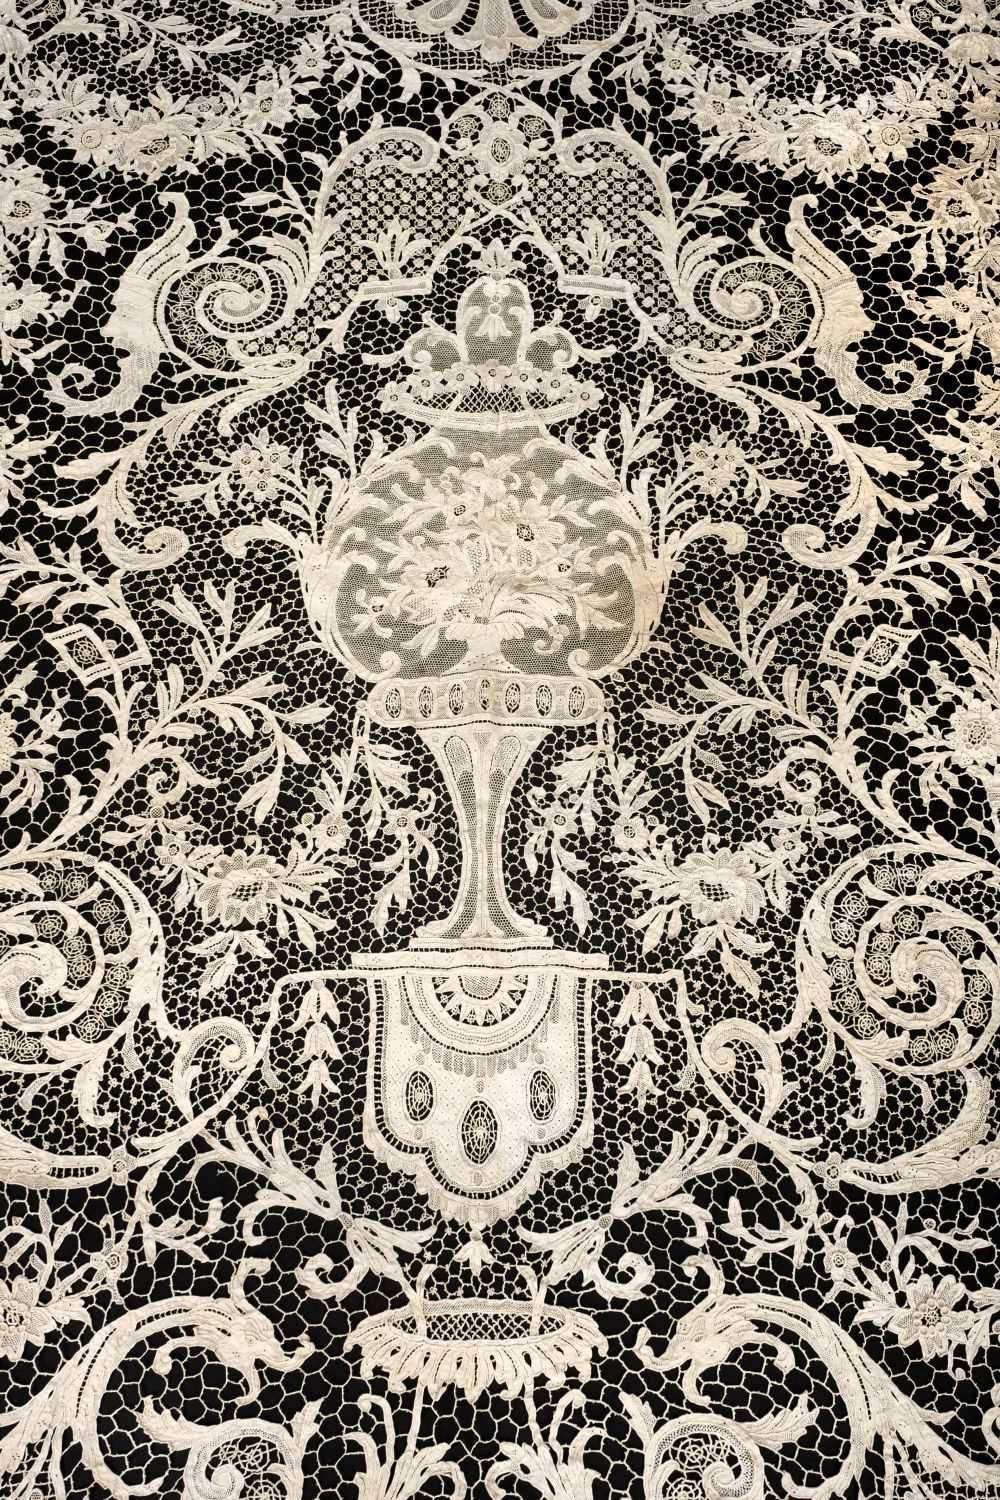 Lot 745 - Lace Bedcover. A fine Point de Venise coverlet, possibly Continental, 19th century